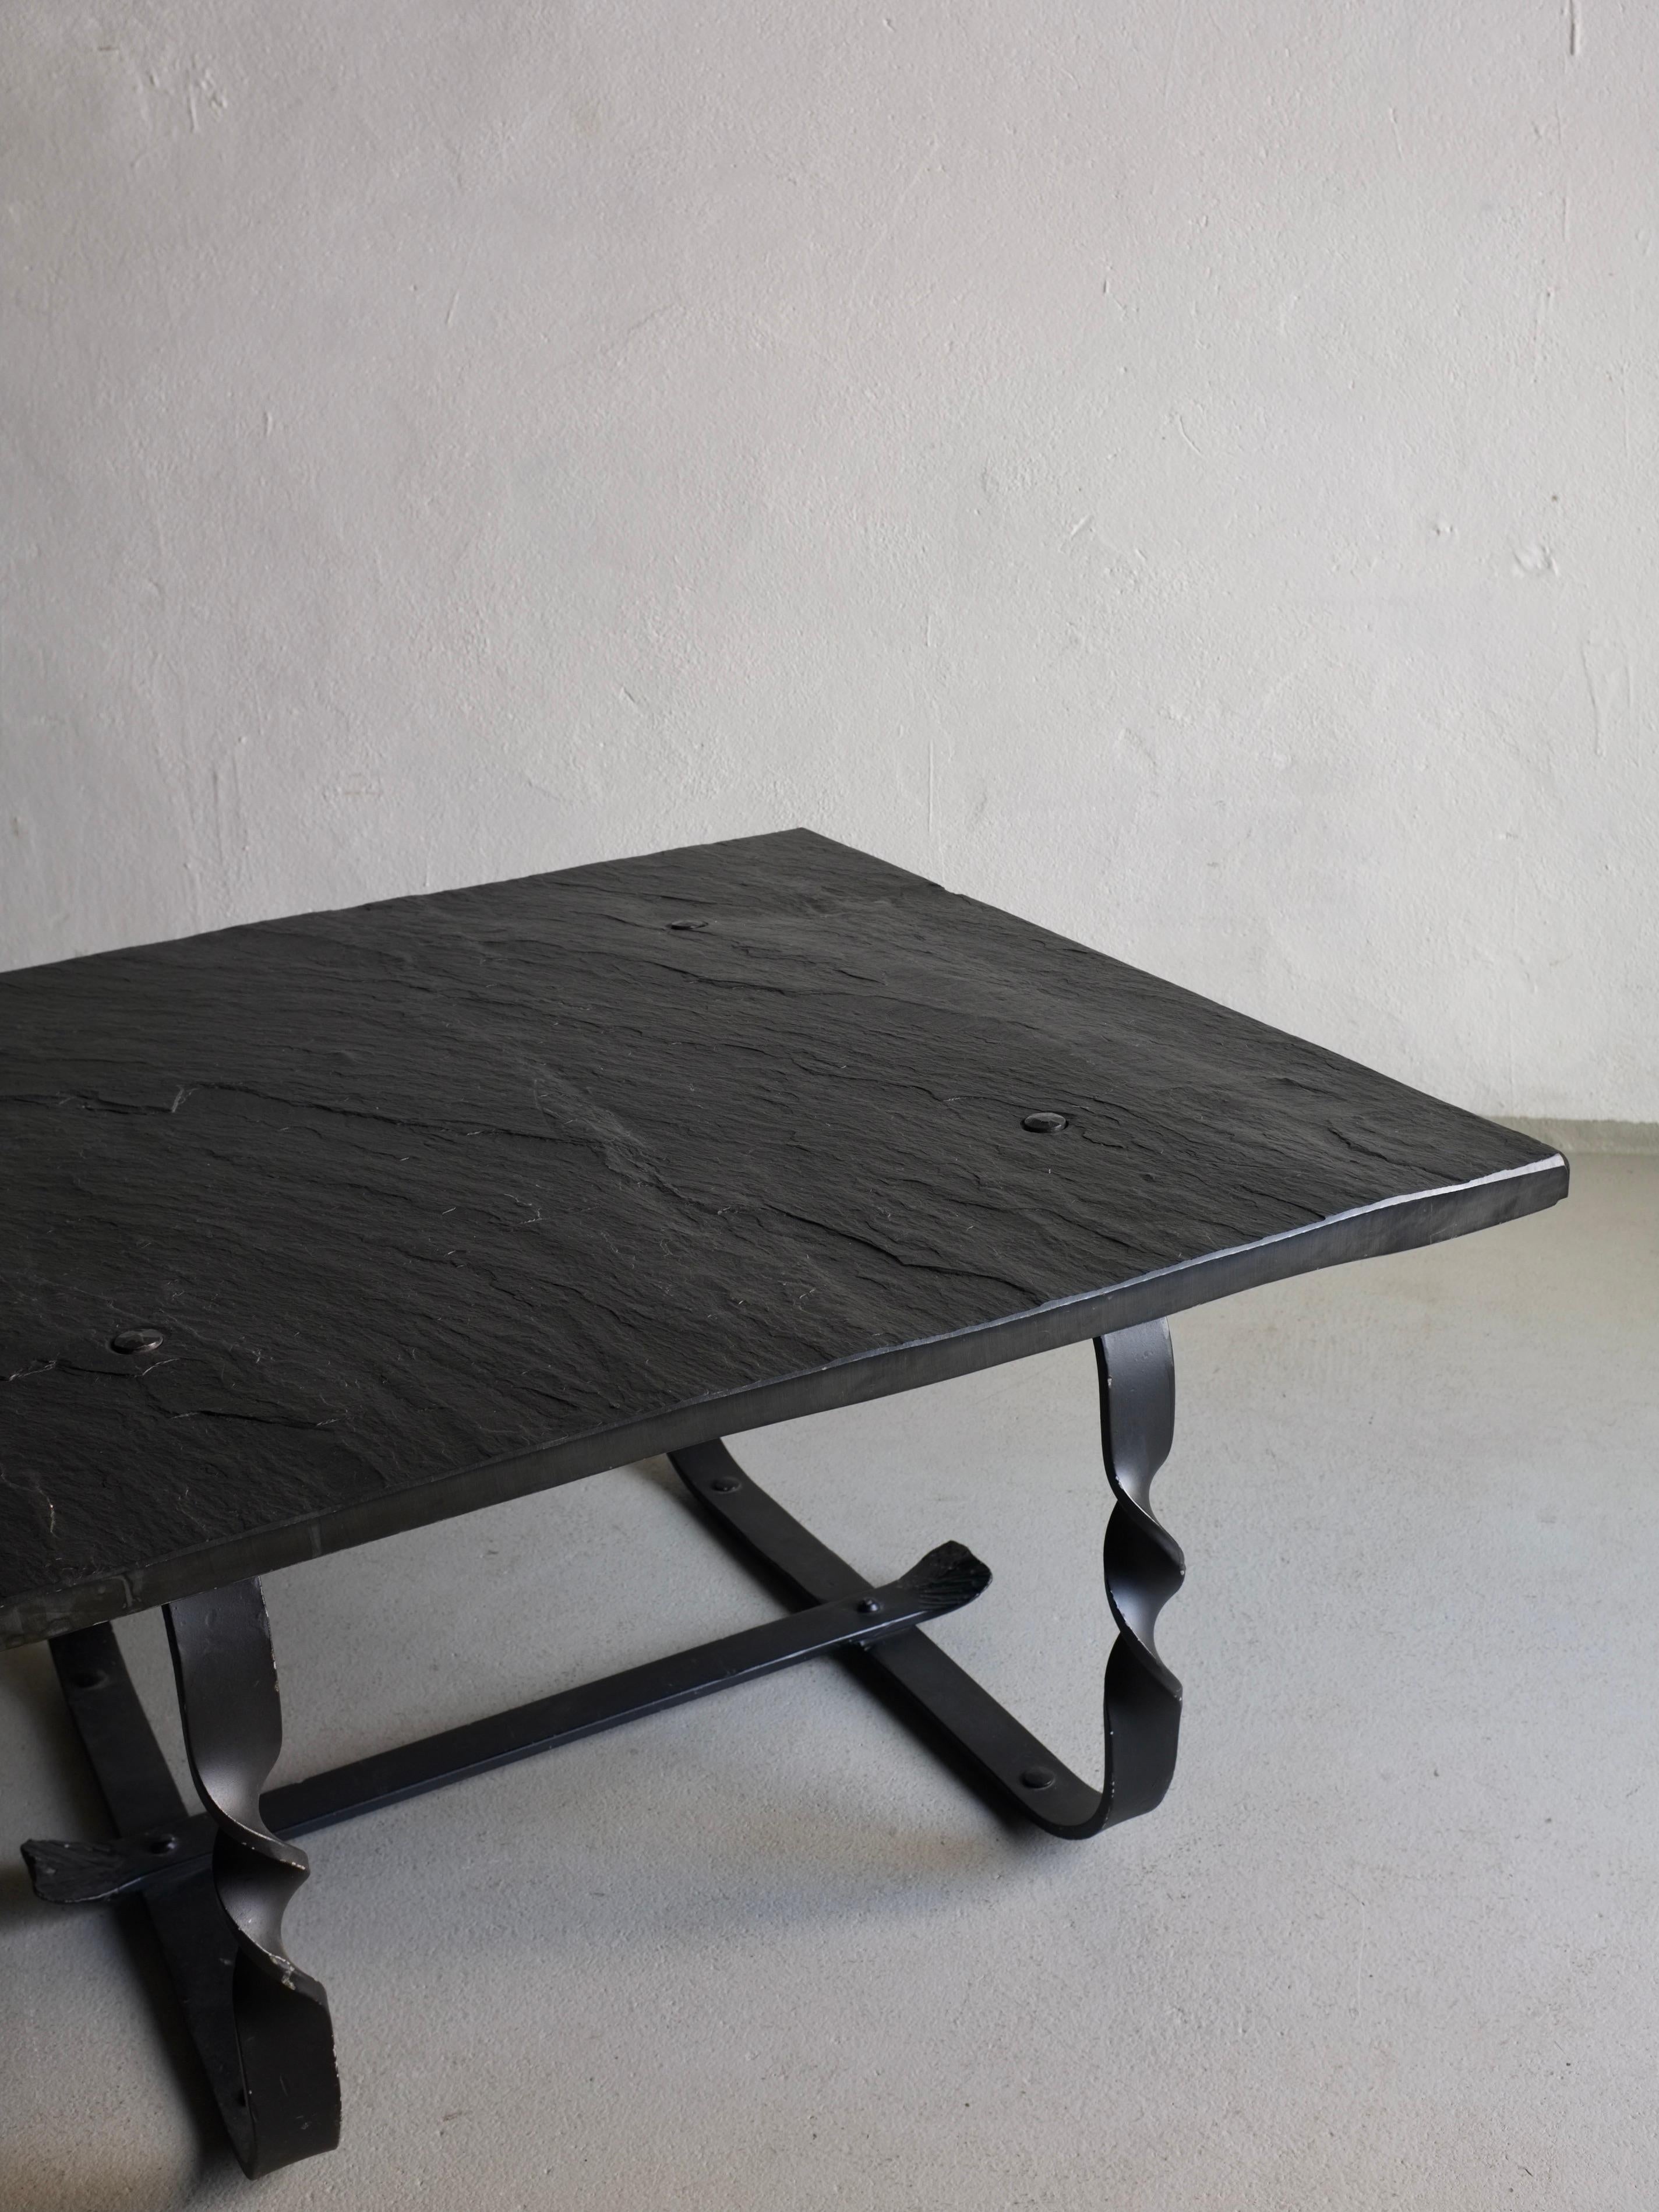 Brutalist Wrought Metal Black Stone Square Coffee Table, France, 1970s For Sale